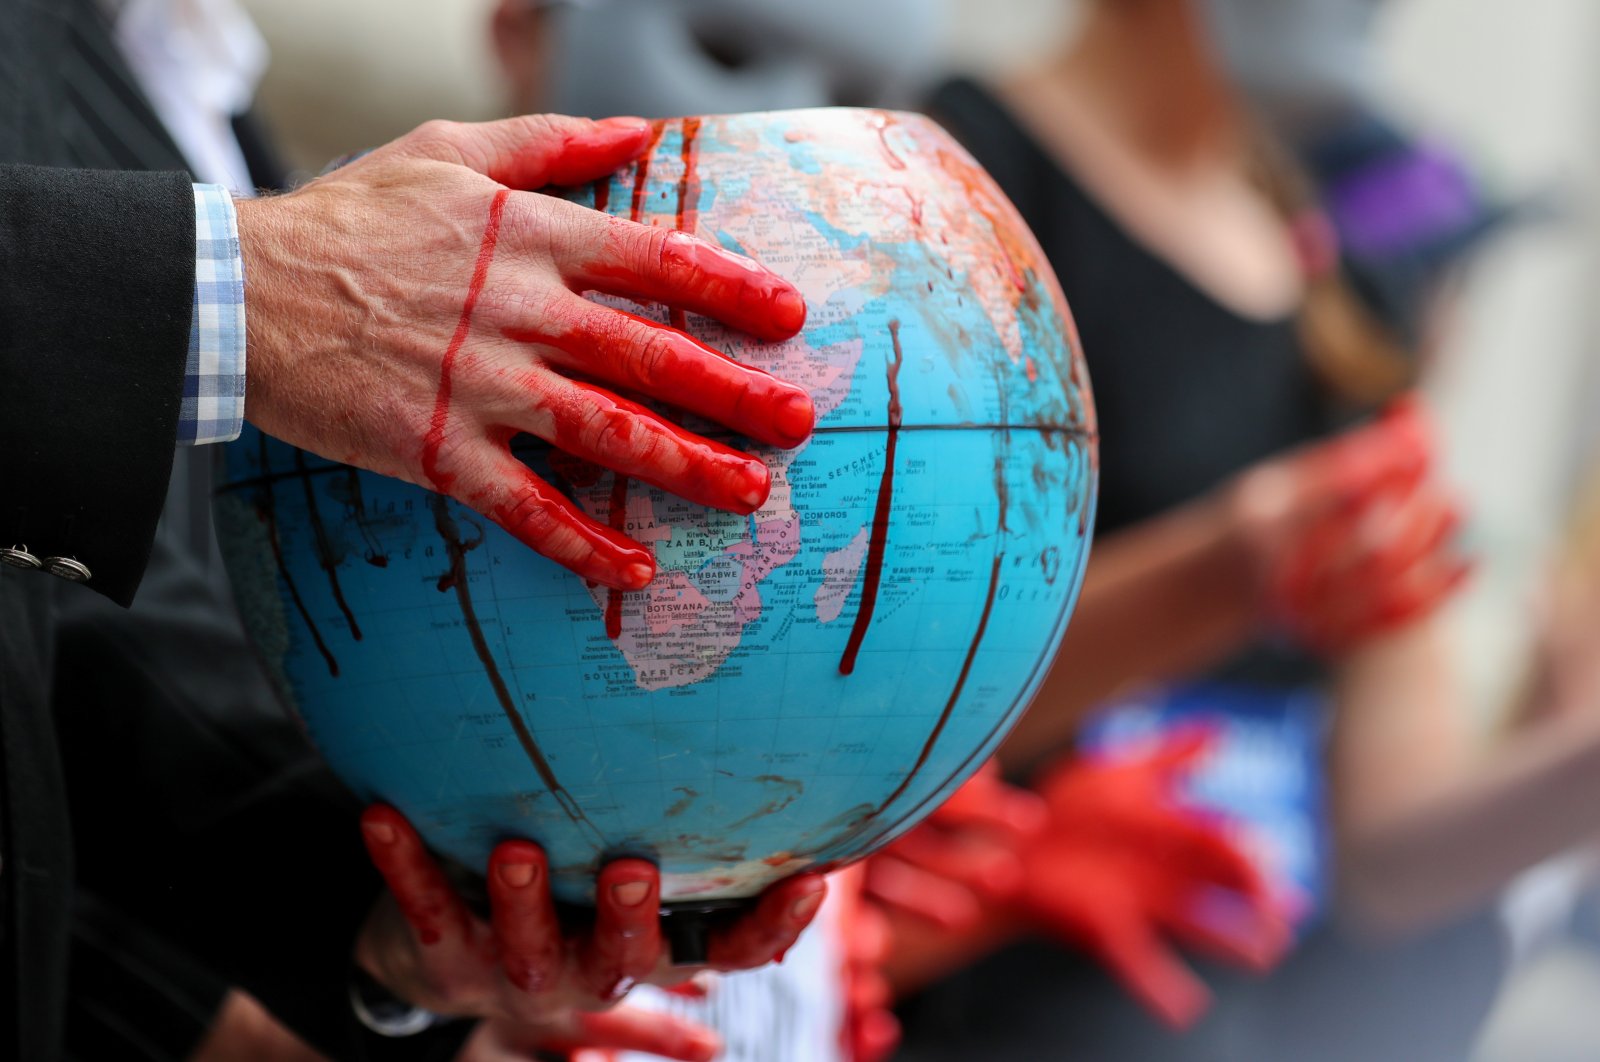 An Extinction Rebellion climate activist holds a globe stained with fake blood during a protest outside the Bank of England, in London, Britain Aug. 27, 2021. (Reuters Photo)